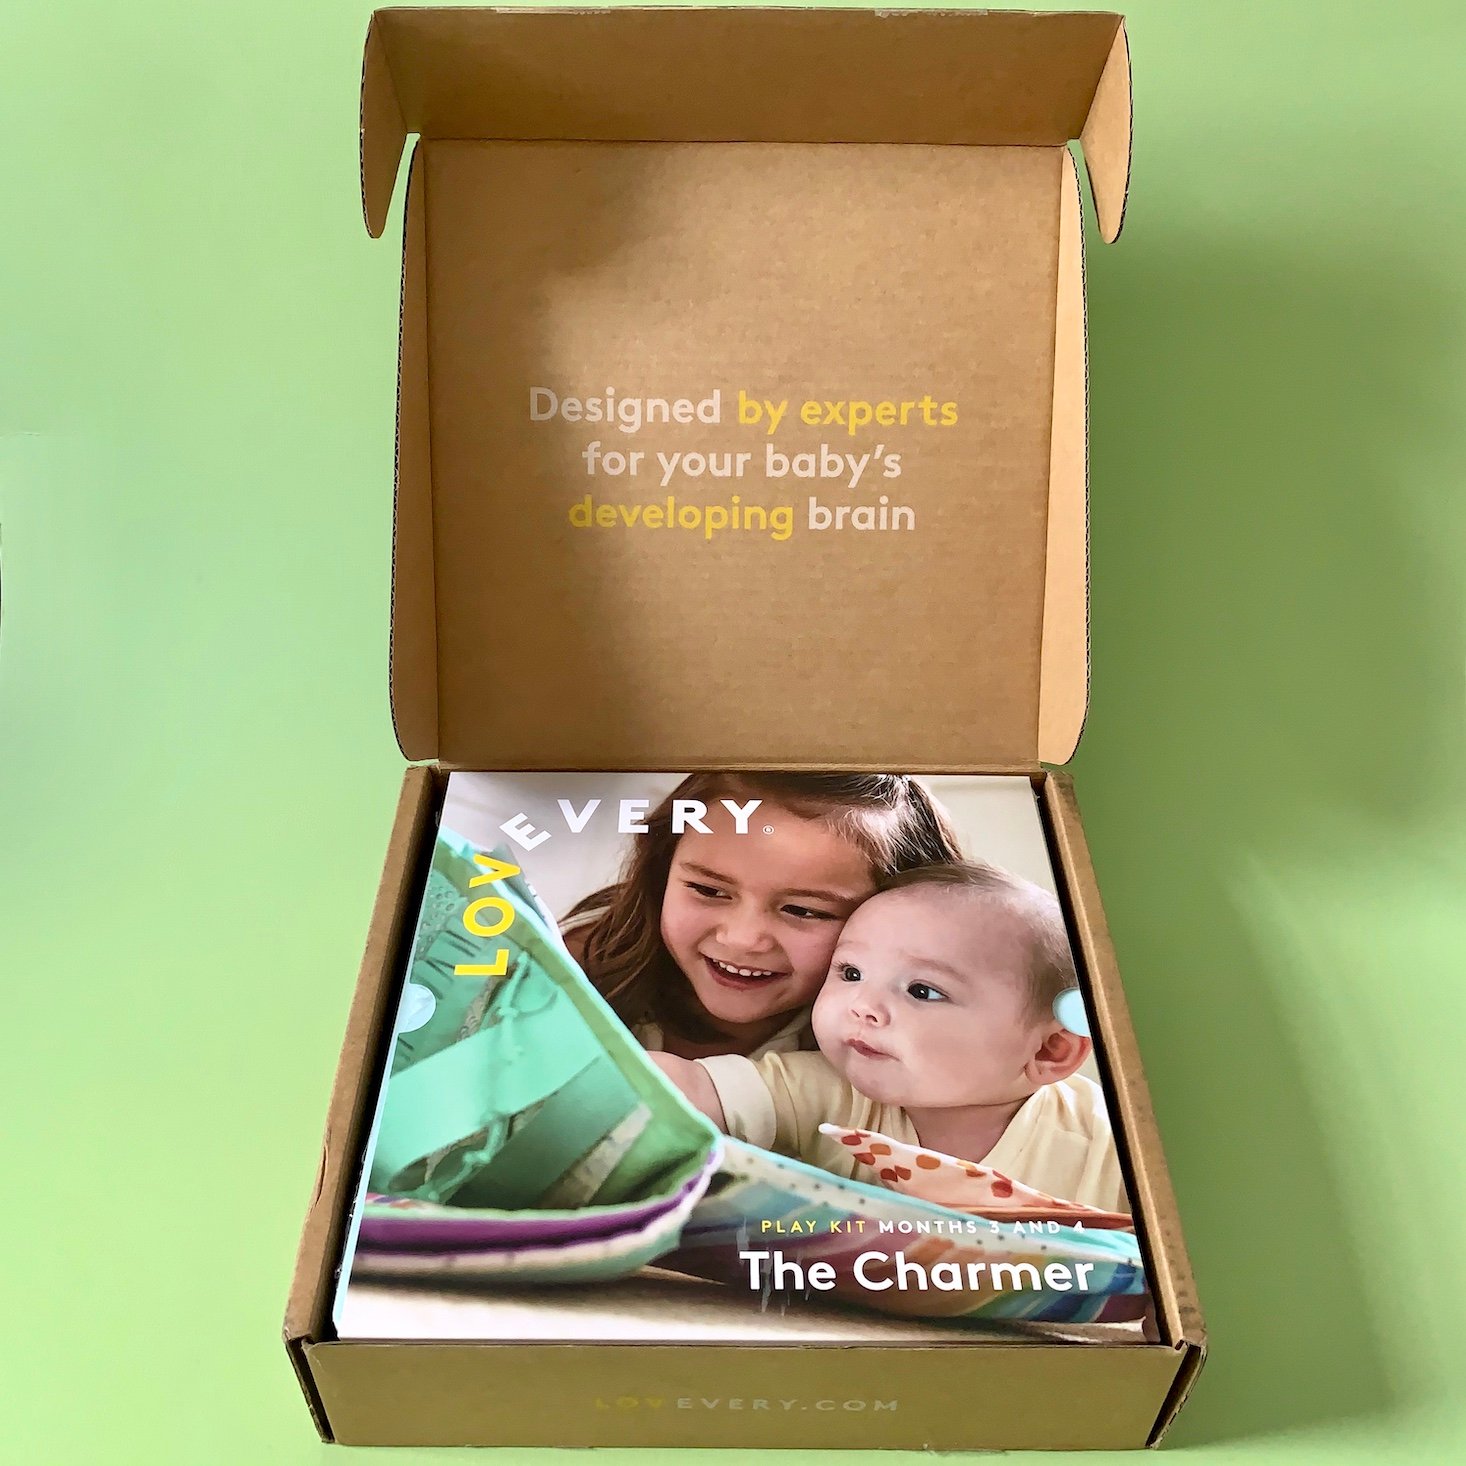 Lovevery The Charmer Play Kit Review - February 2020